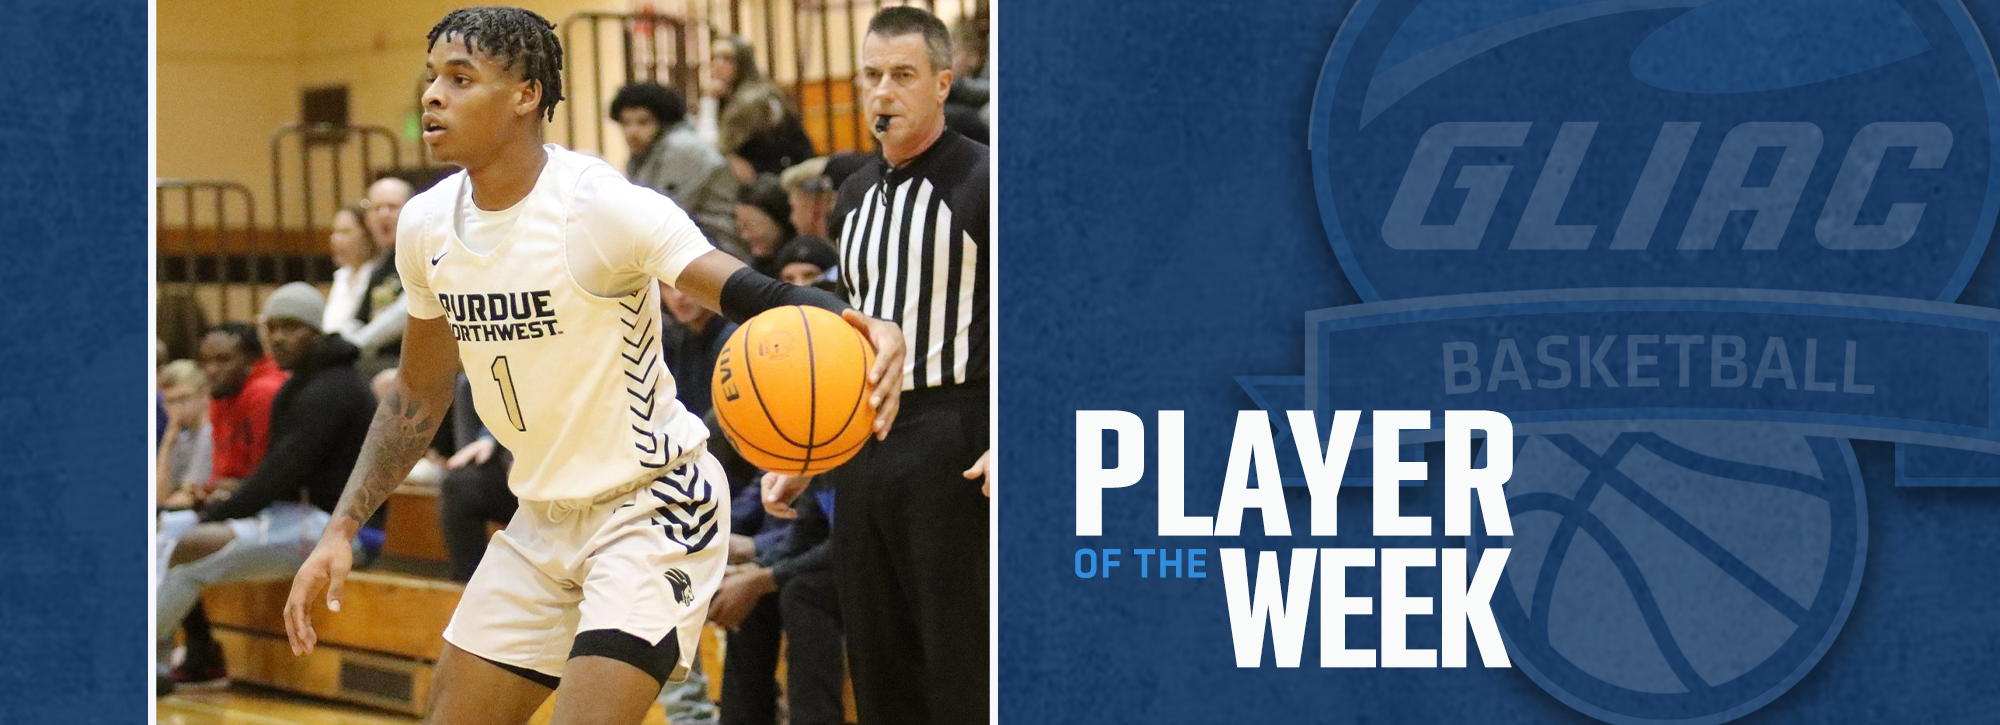 PNW's Cooper receives GLIAC Men's Basketball Player of the Week honors